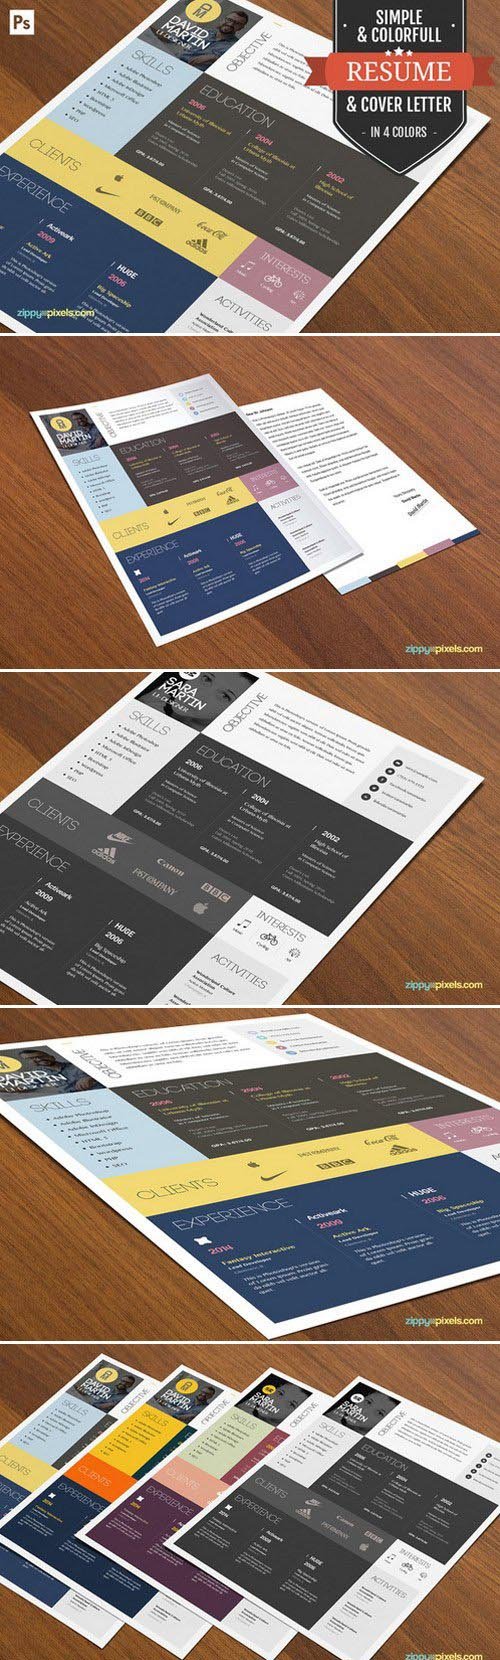 CM - Resume/Cover Letter Template Layout 394480